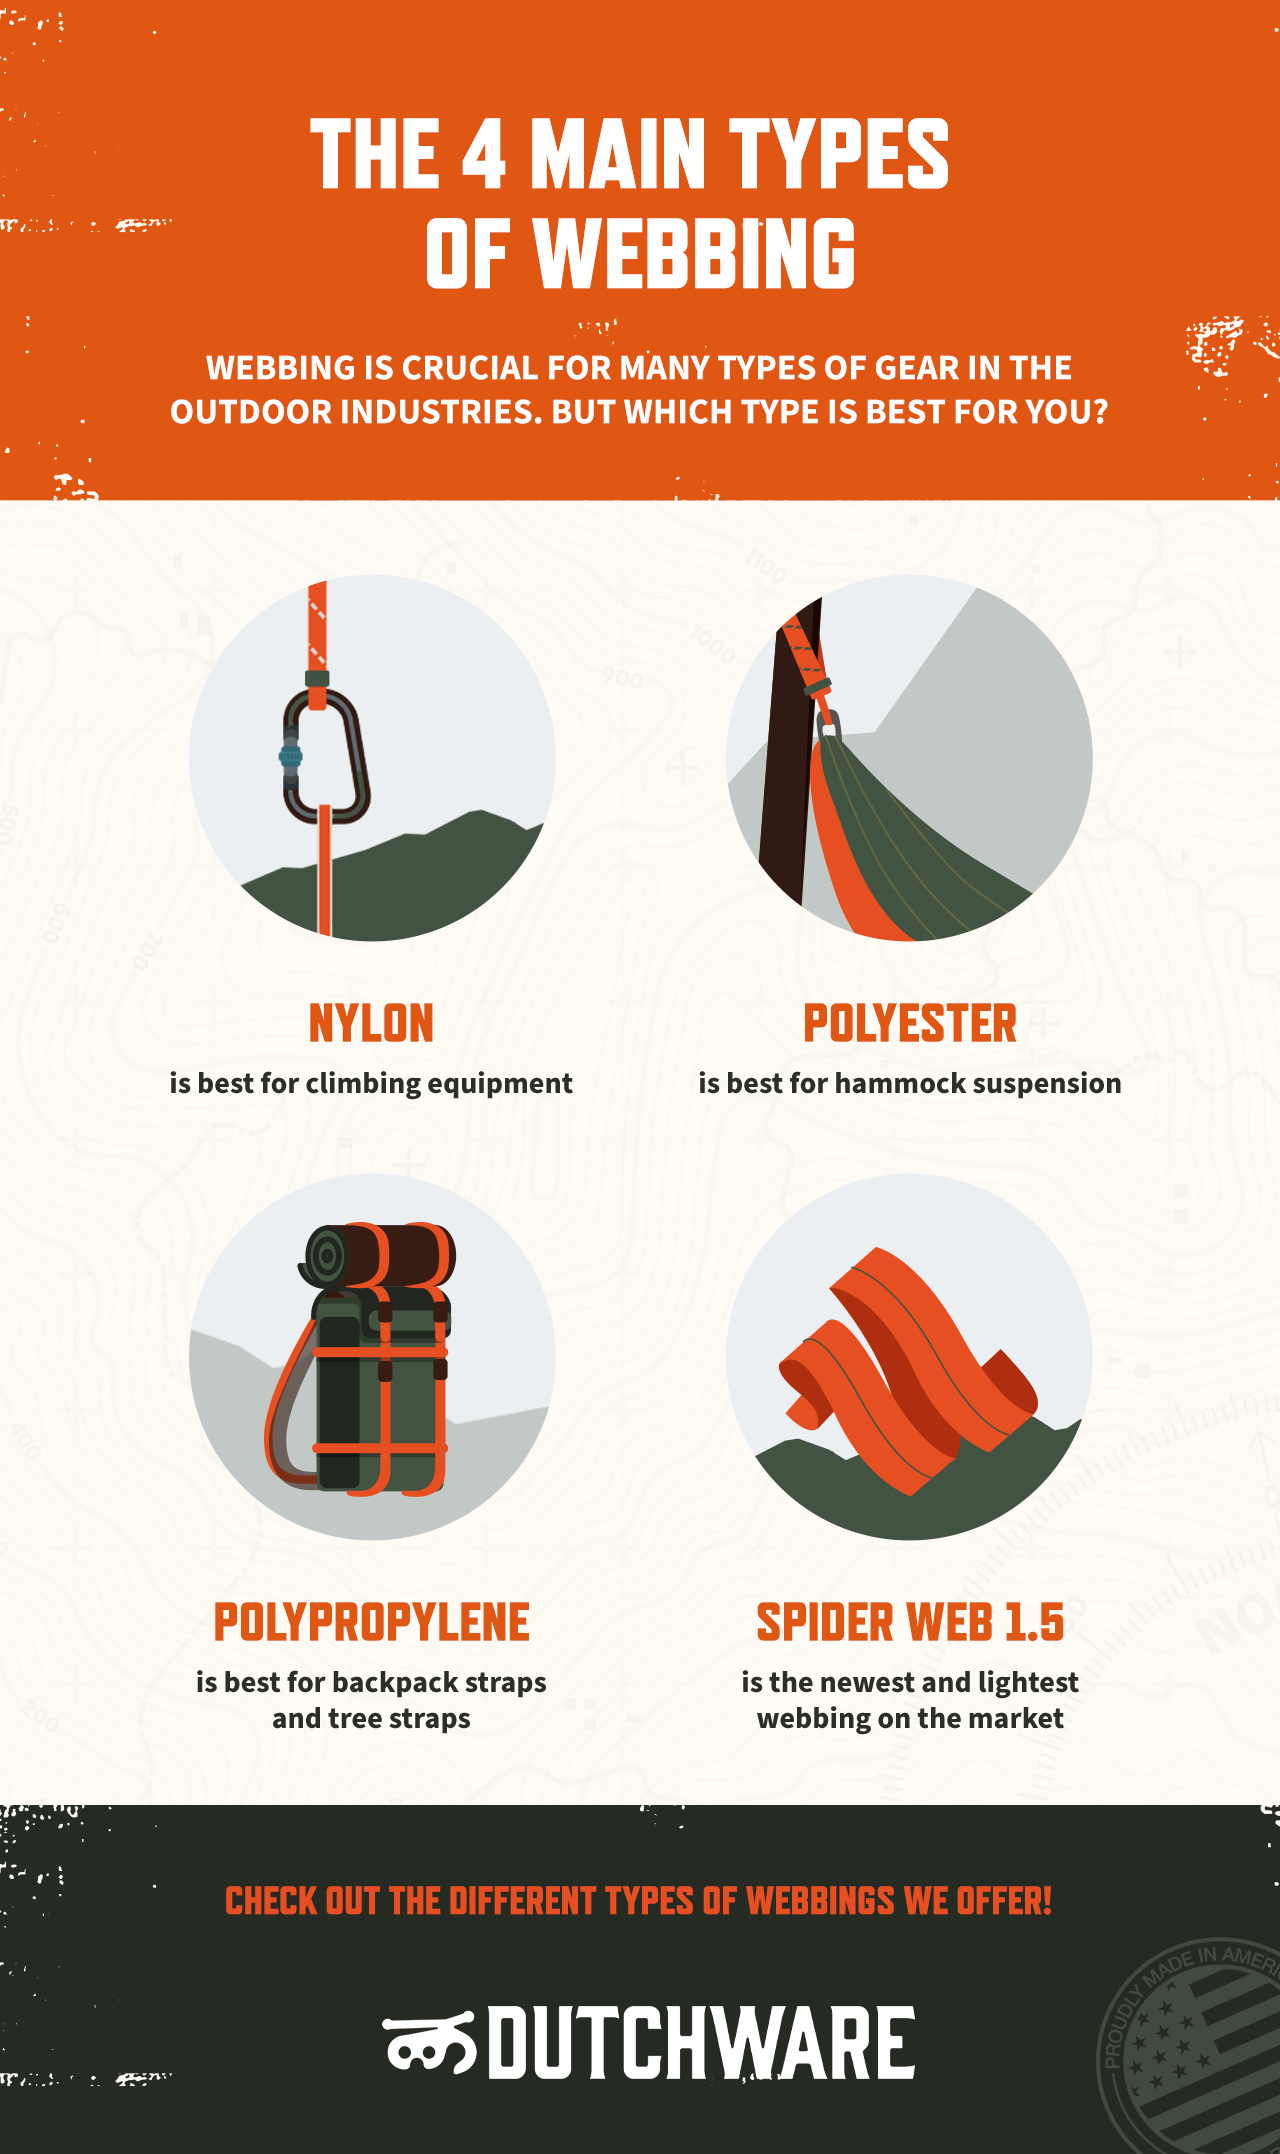 Comparing Different Materials Used for Webbing - Dutchware